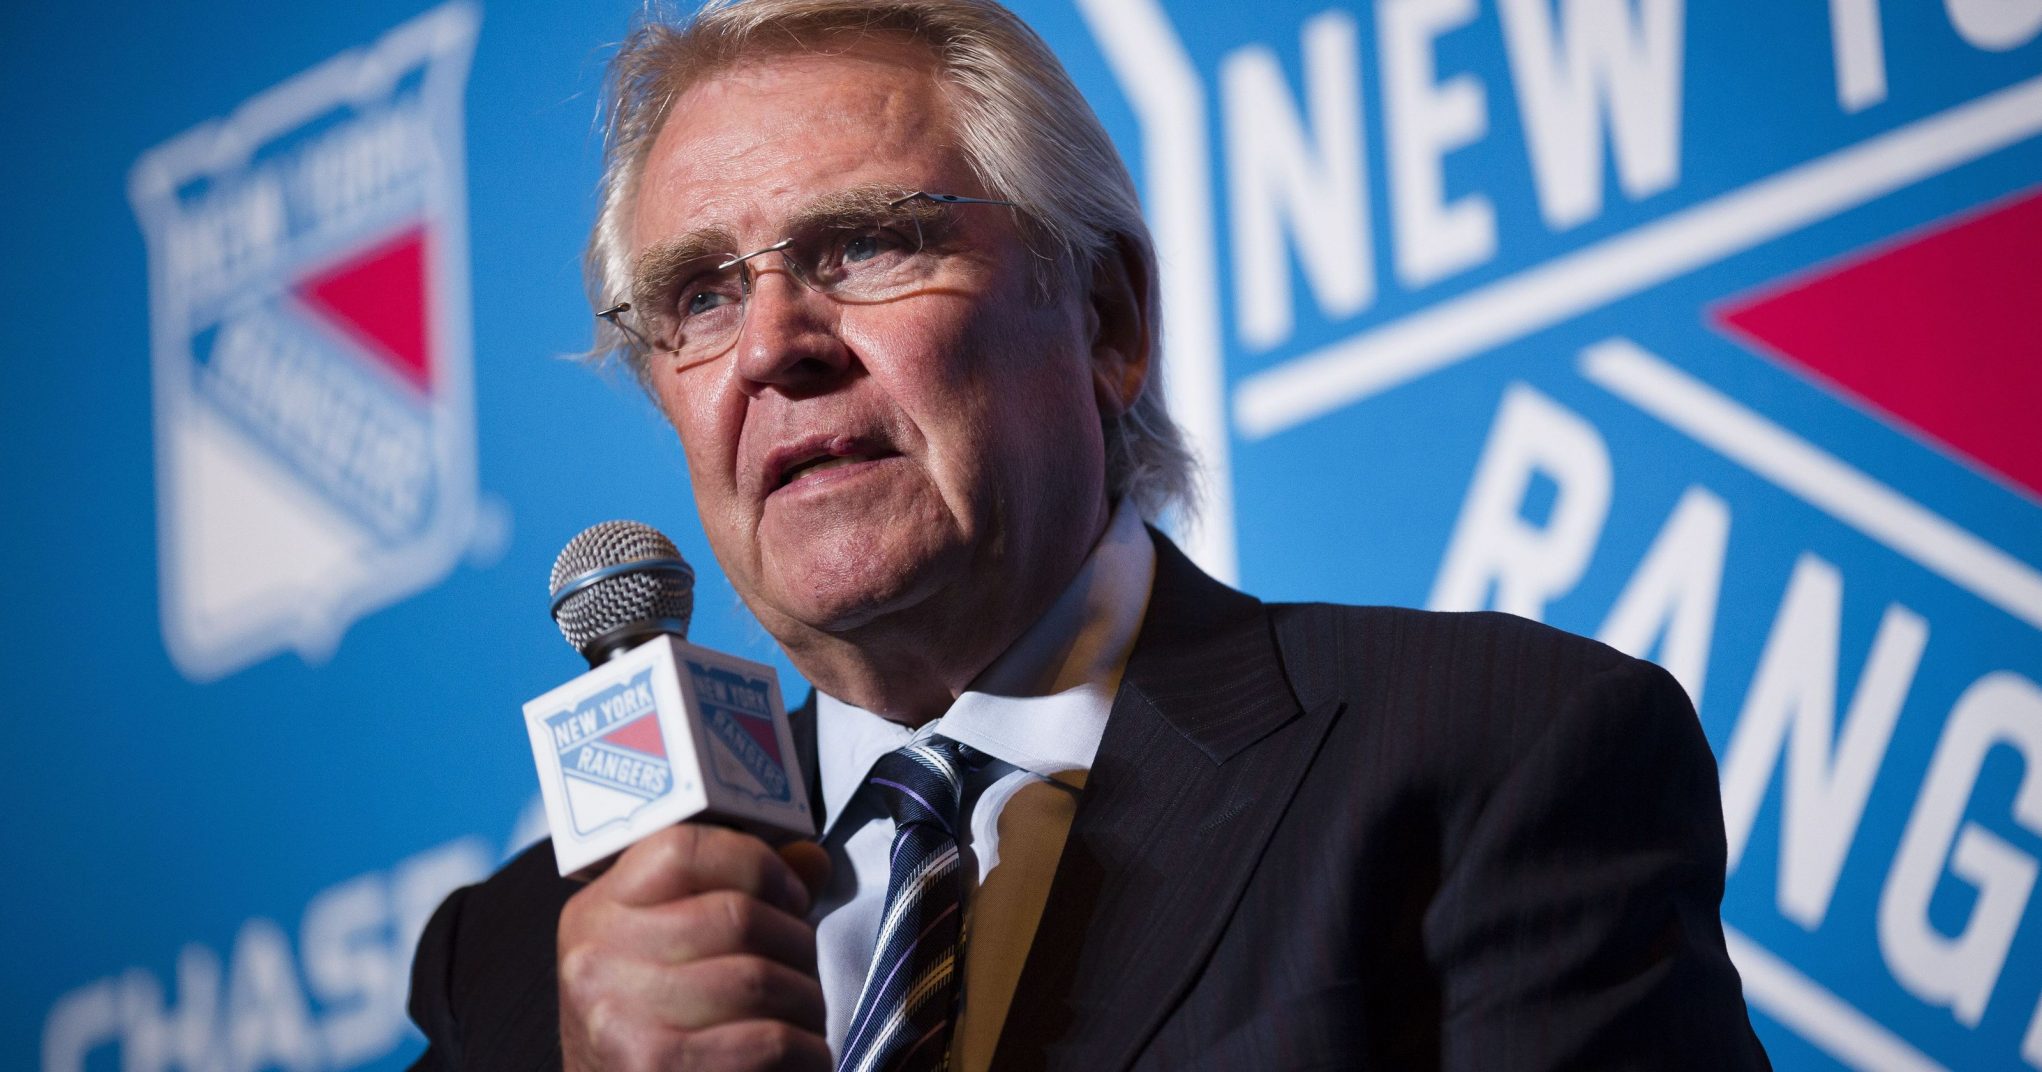 Rangers' Sather could be stepping down